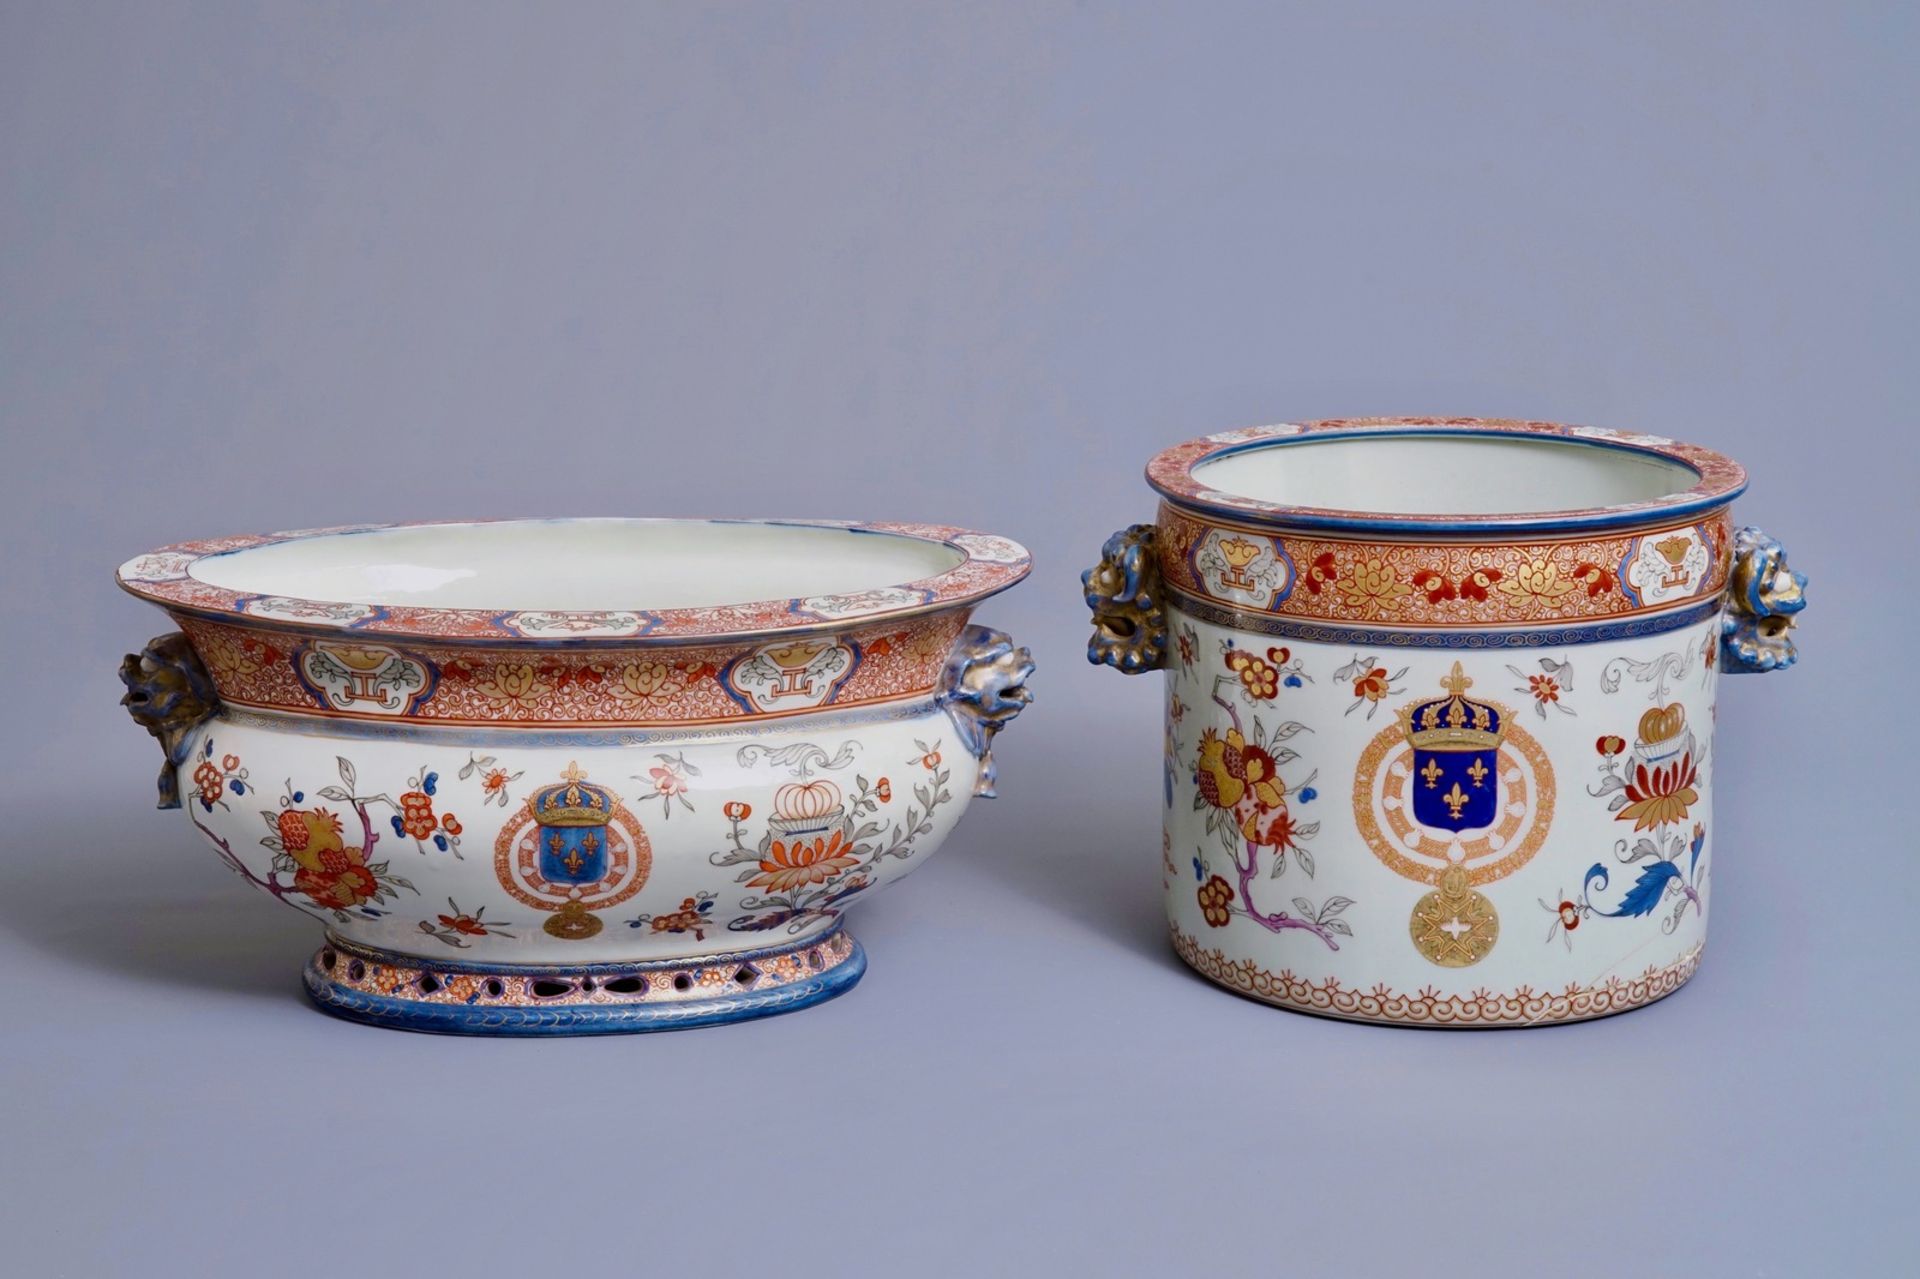 Two coolers with arms of King Louis XV of France in the Chinese export porcelain style, Samson, Pari